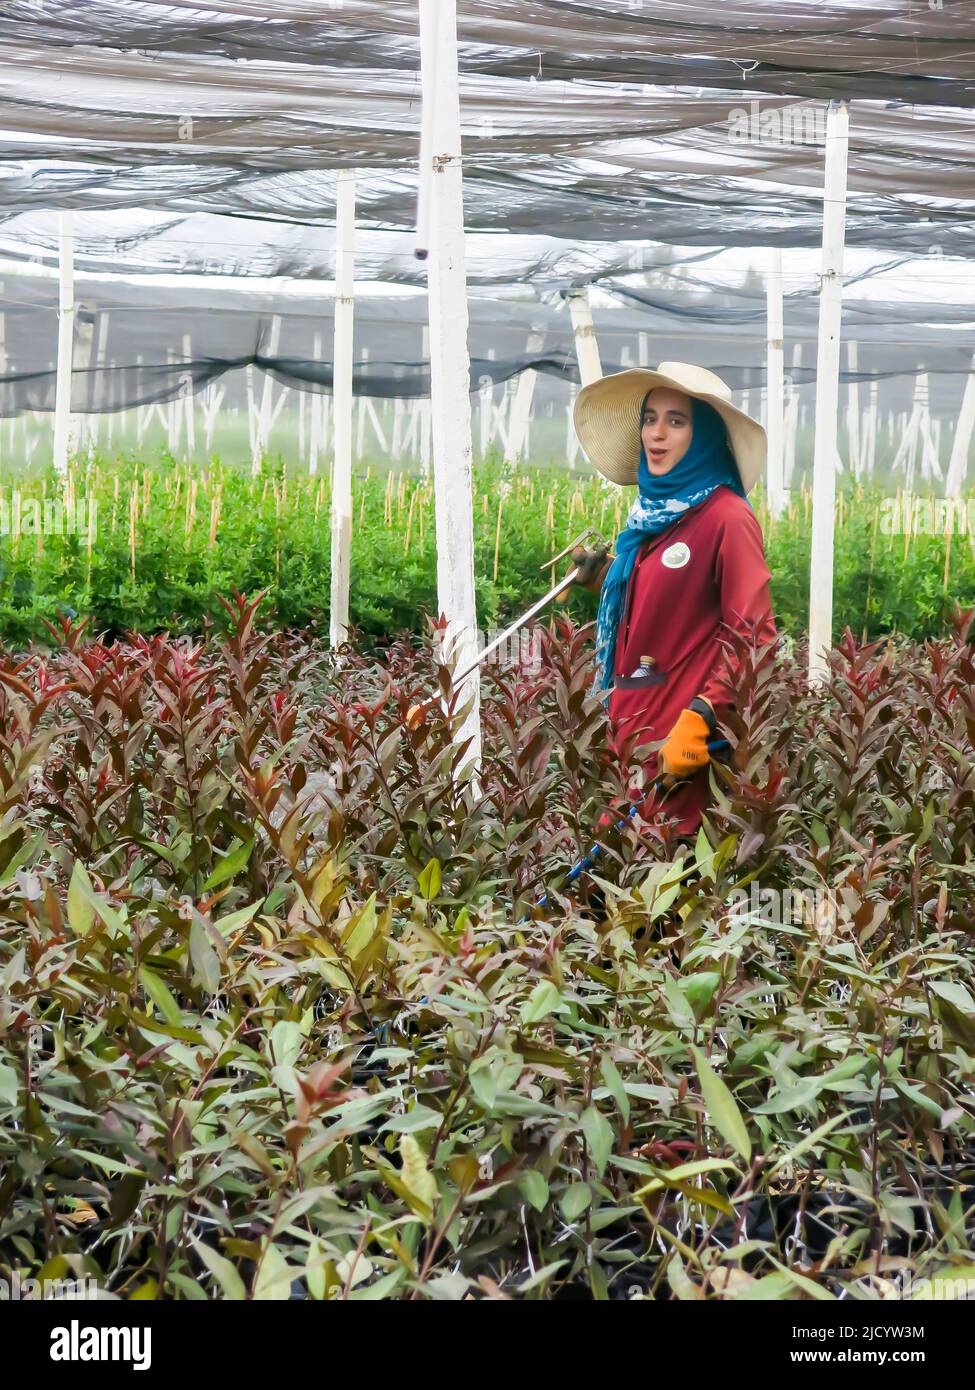 Vast Assortment of Plants Growing in Local Nursery Tended to by Staff Member Stock Photo